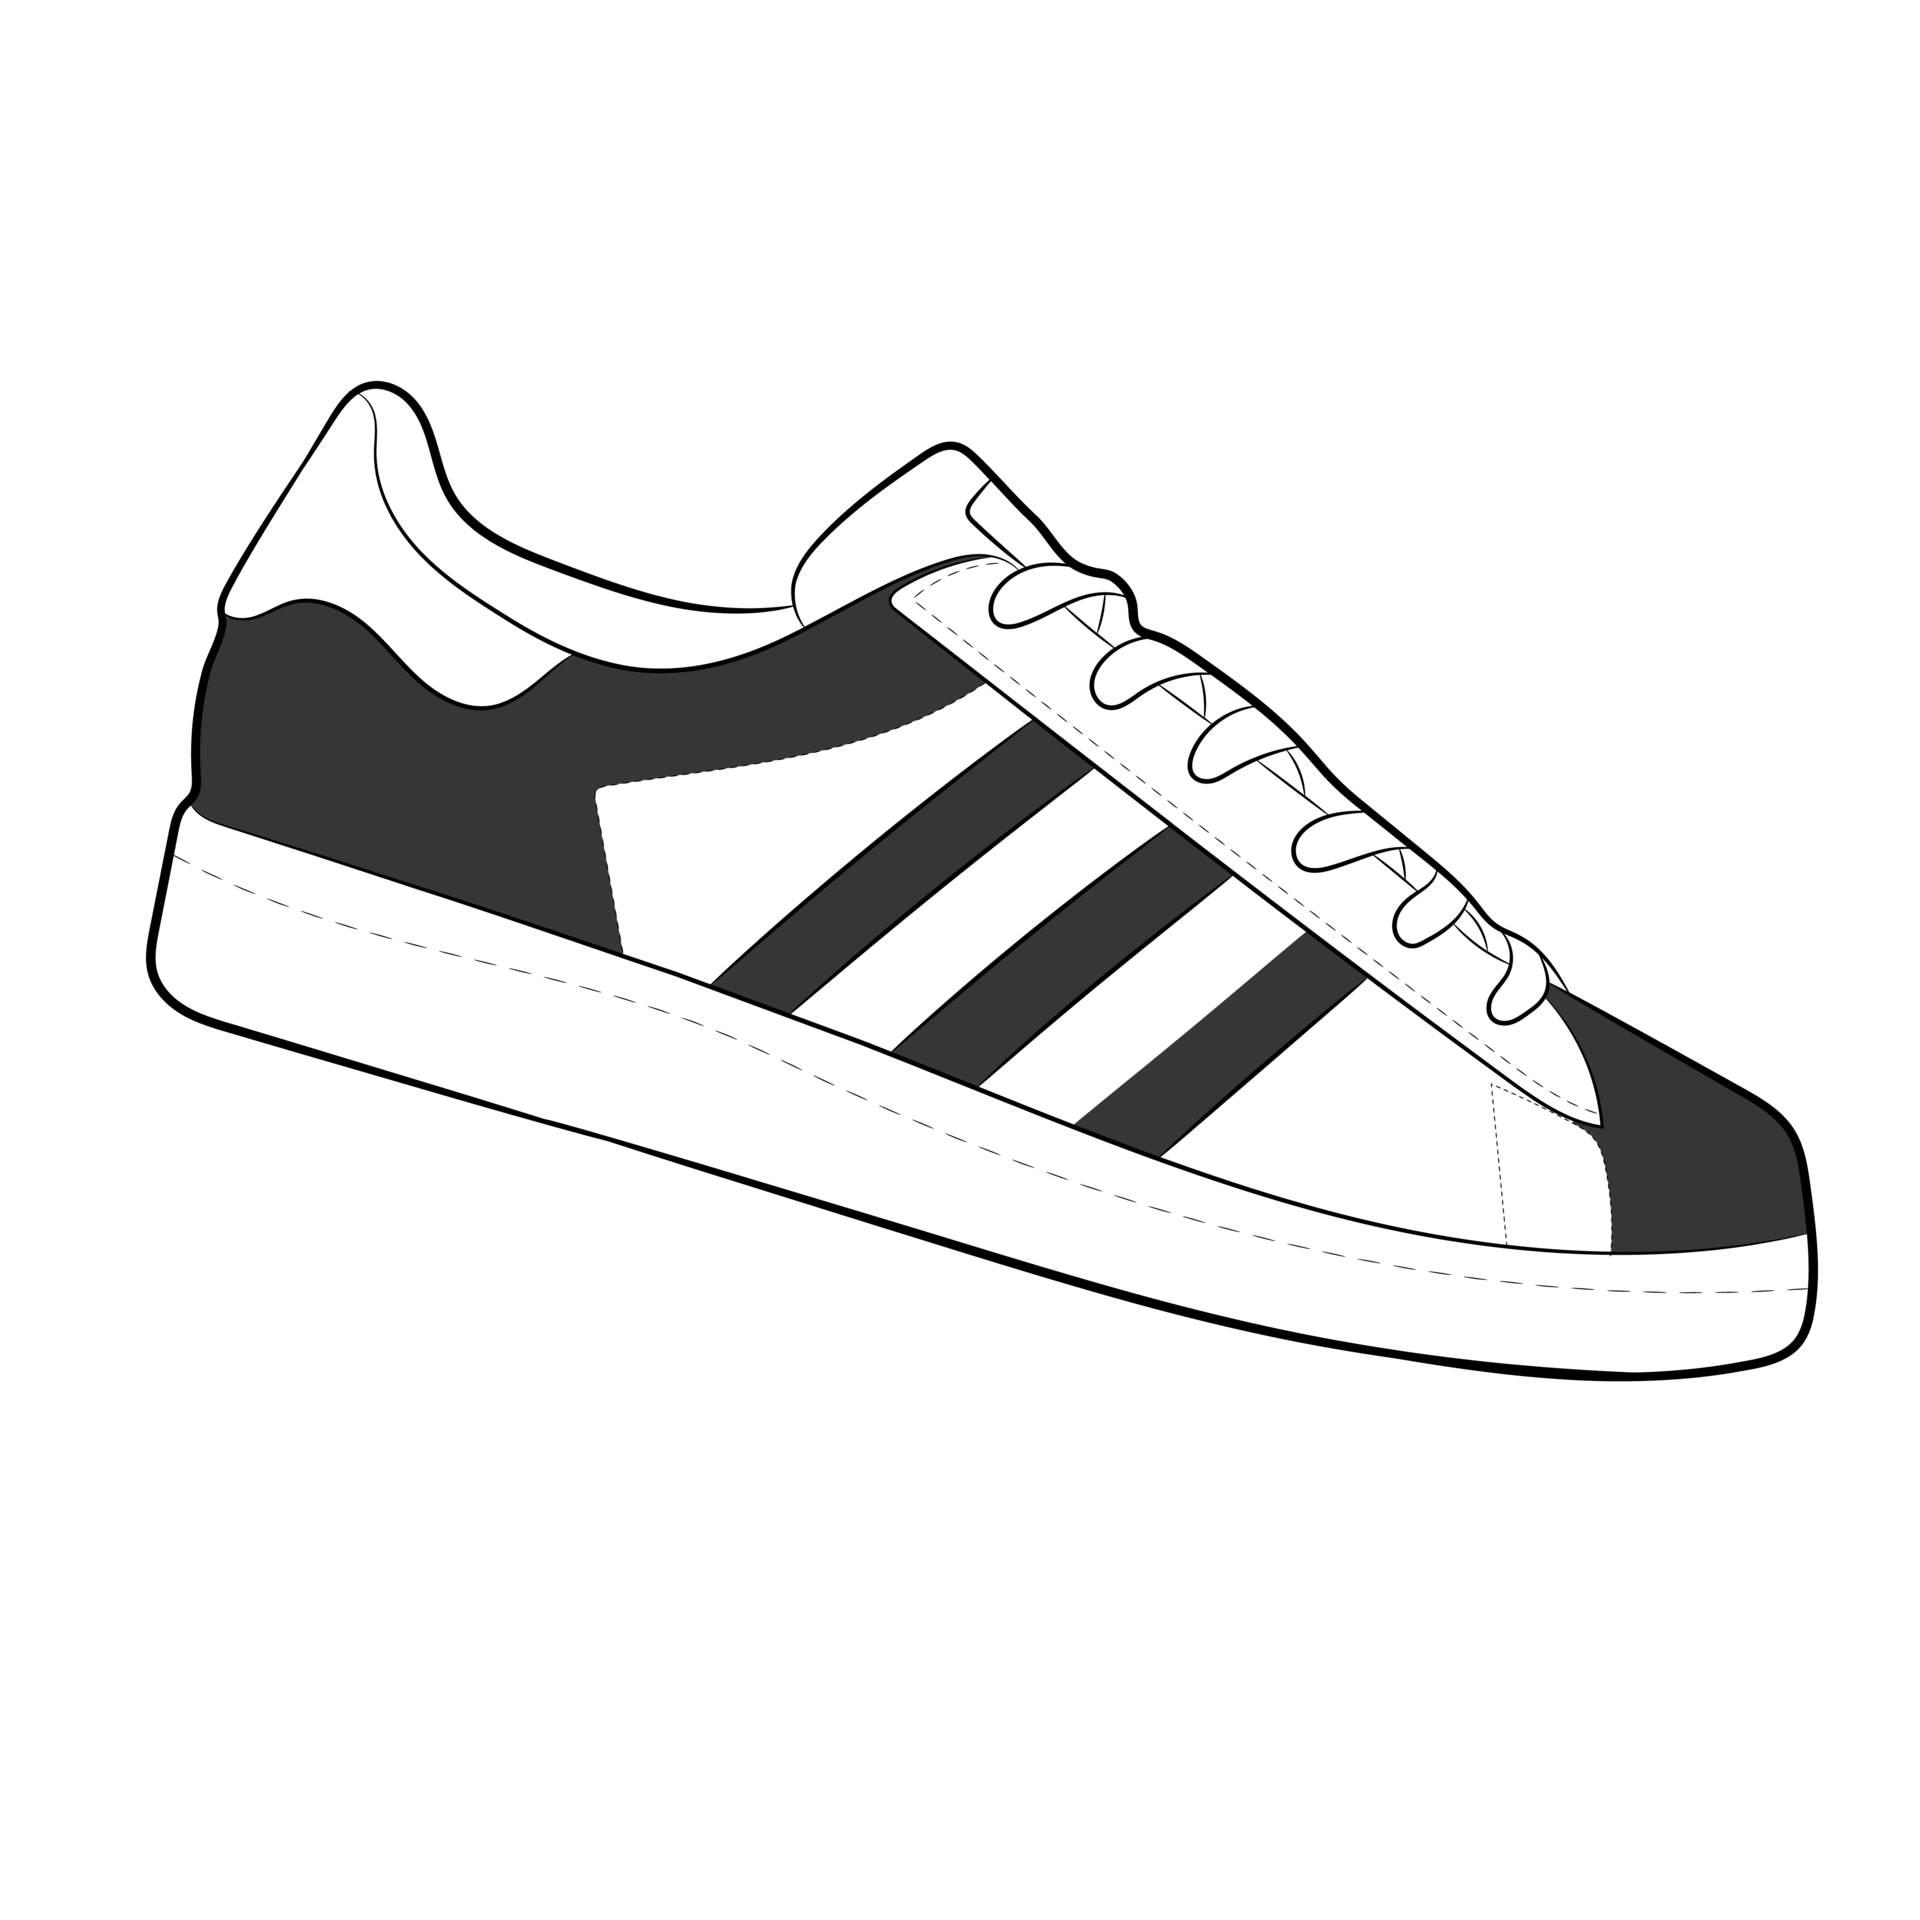 Black Sneaker Design Side View Shoes Pair 27099280 PNG